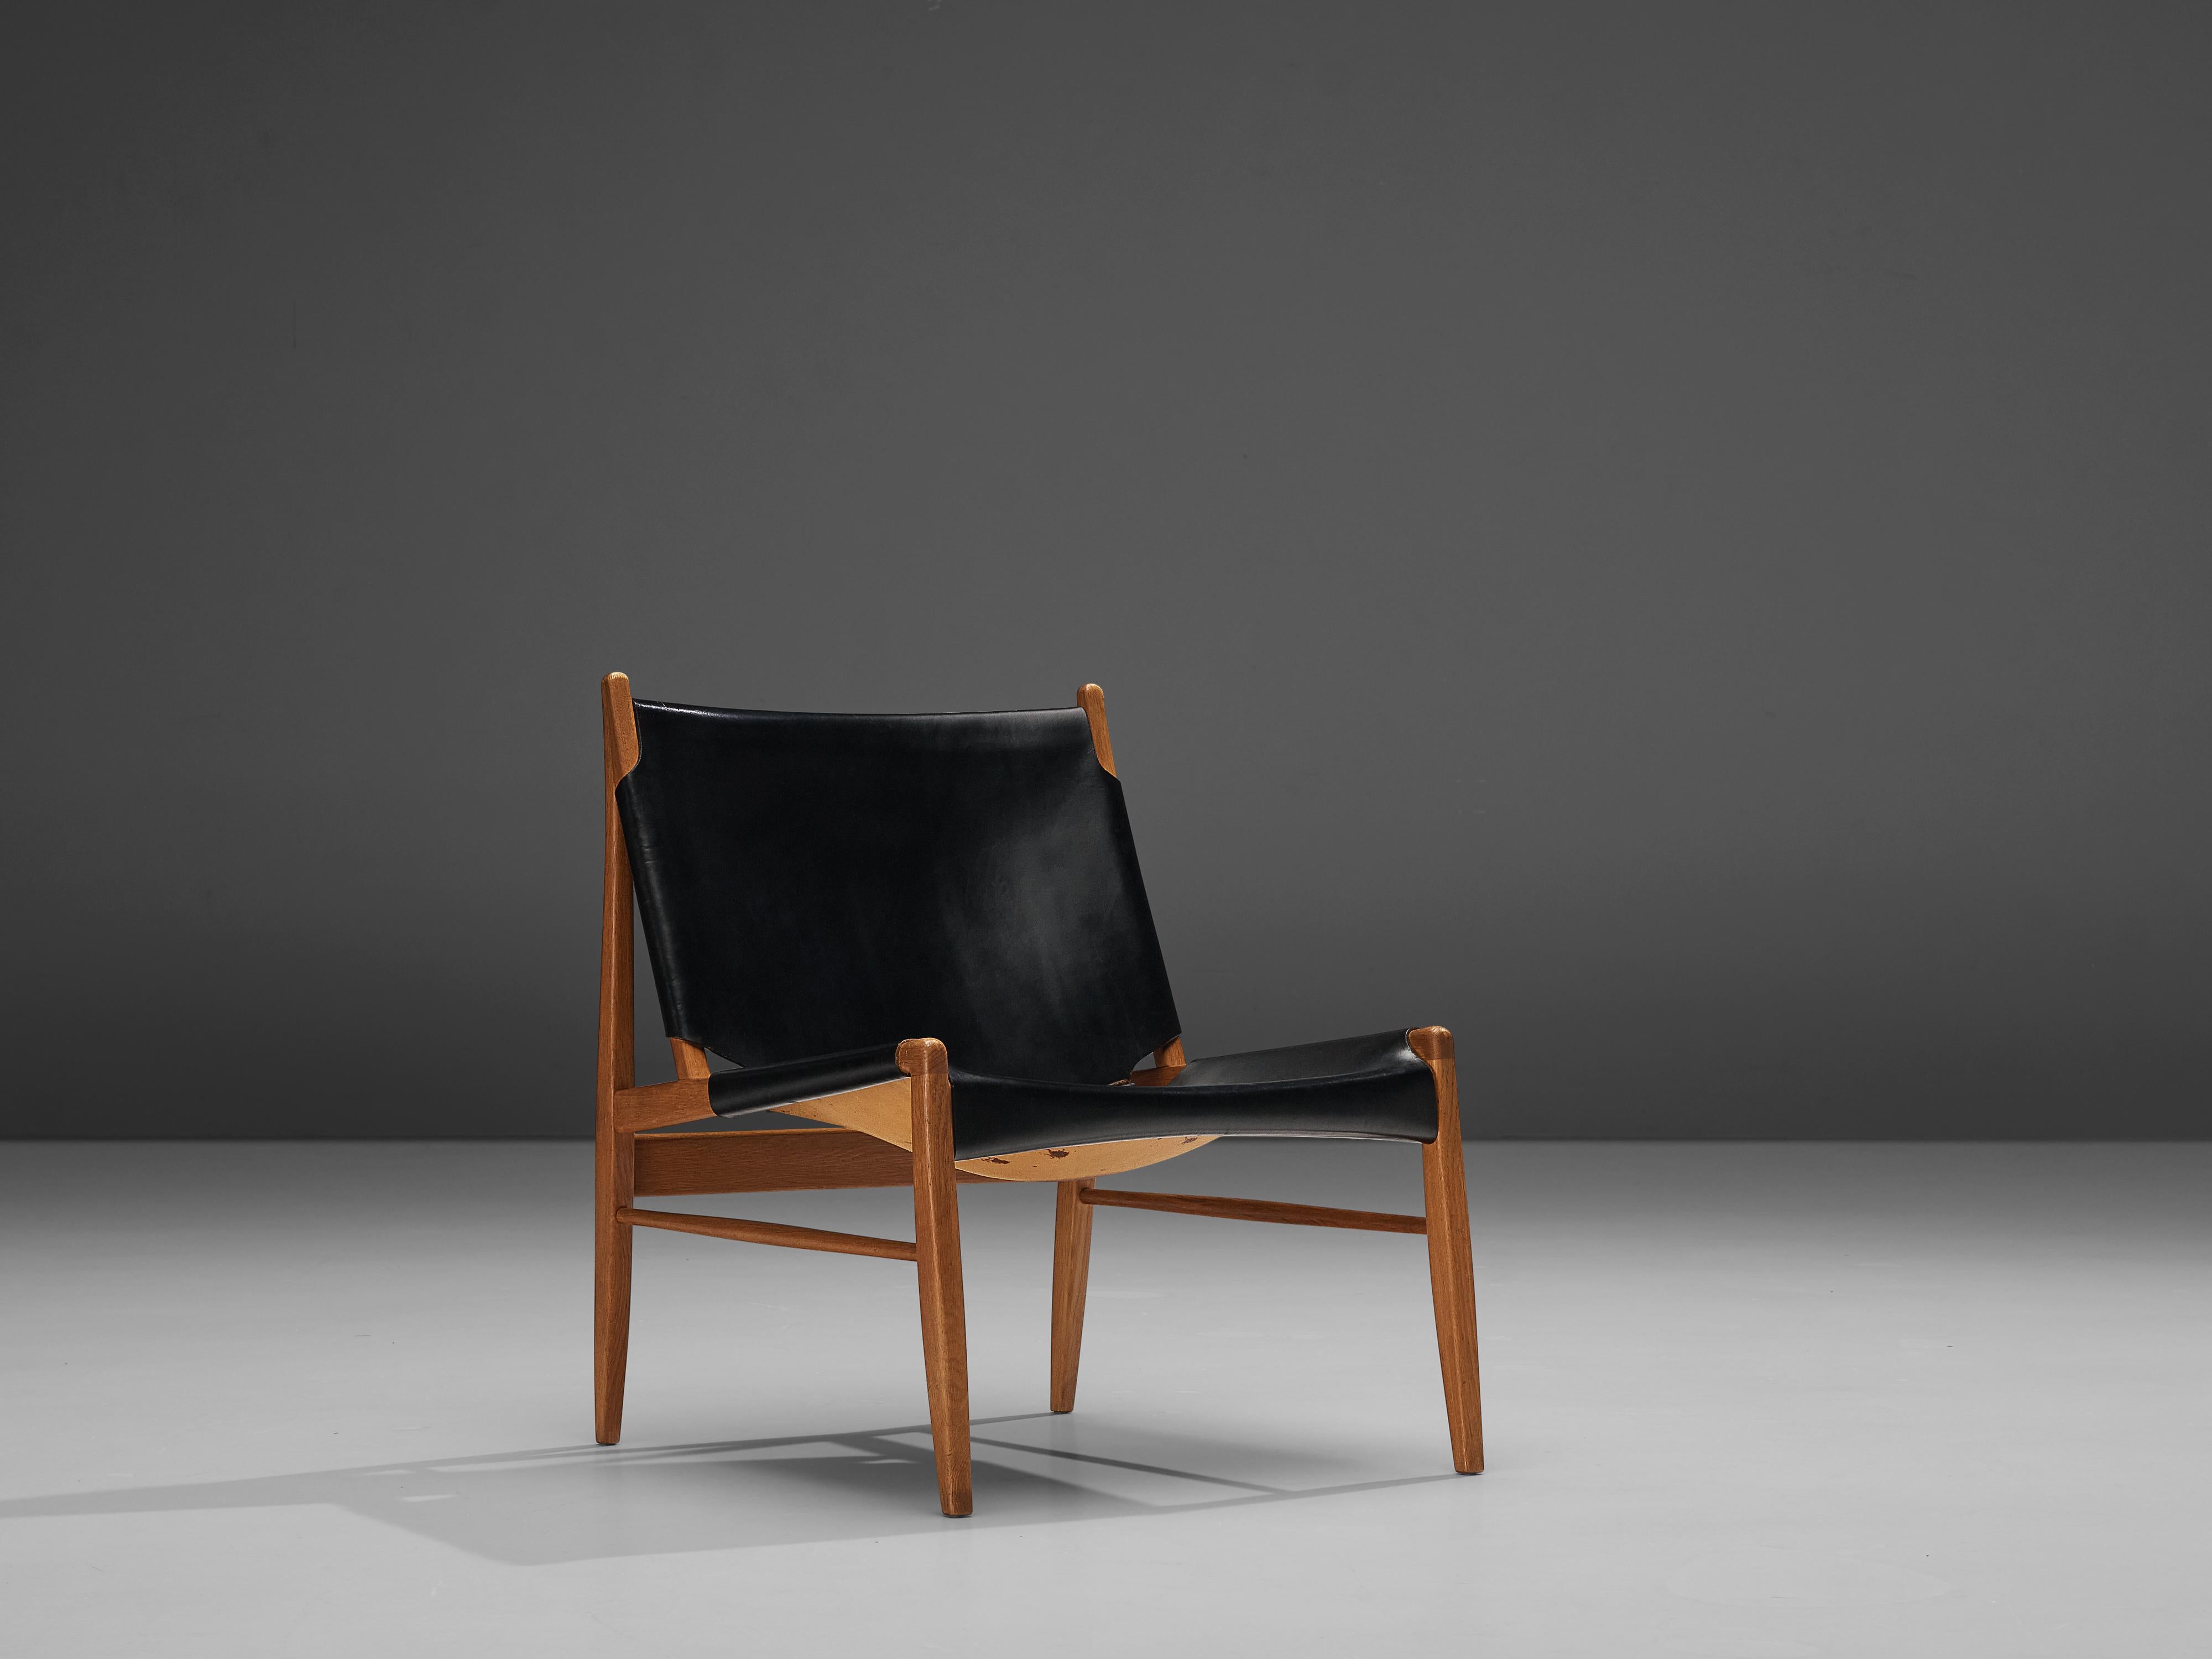 Franz Xaver Lutz for Deutsche Werkstätten, 'Chimney' chair model 1192, oak, original patinated black leather, Germany, 1958

This early 'chimney' chair is designed by Franz Xaver Lutz. The easy chair bears a strong resemblance to Spanish and